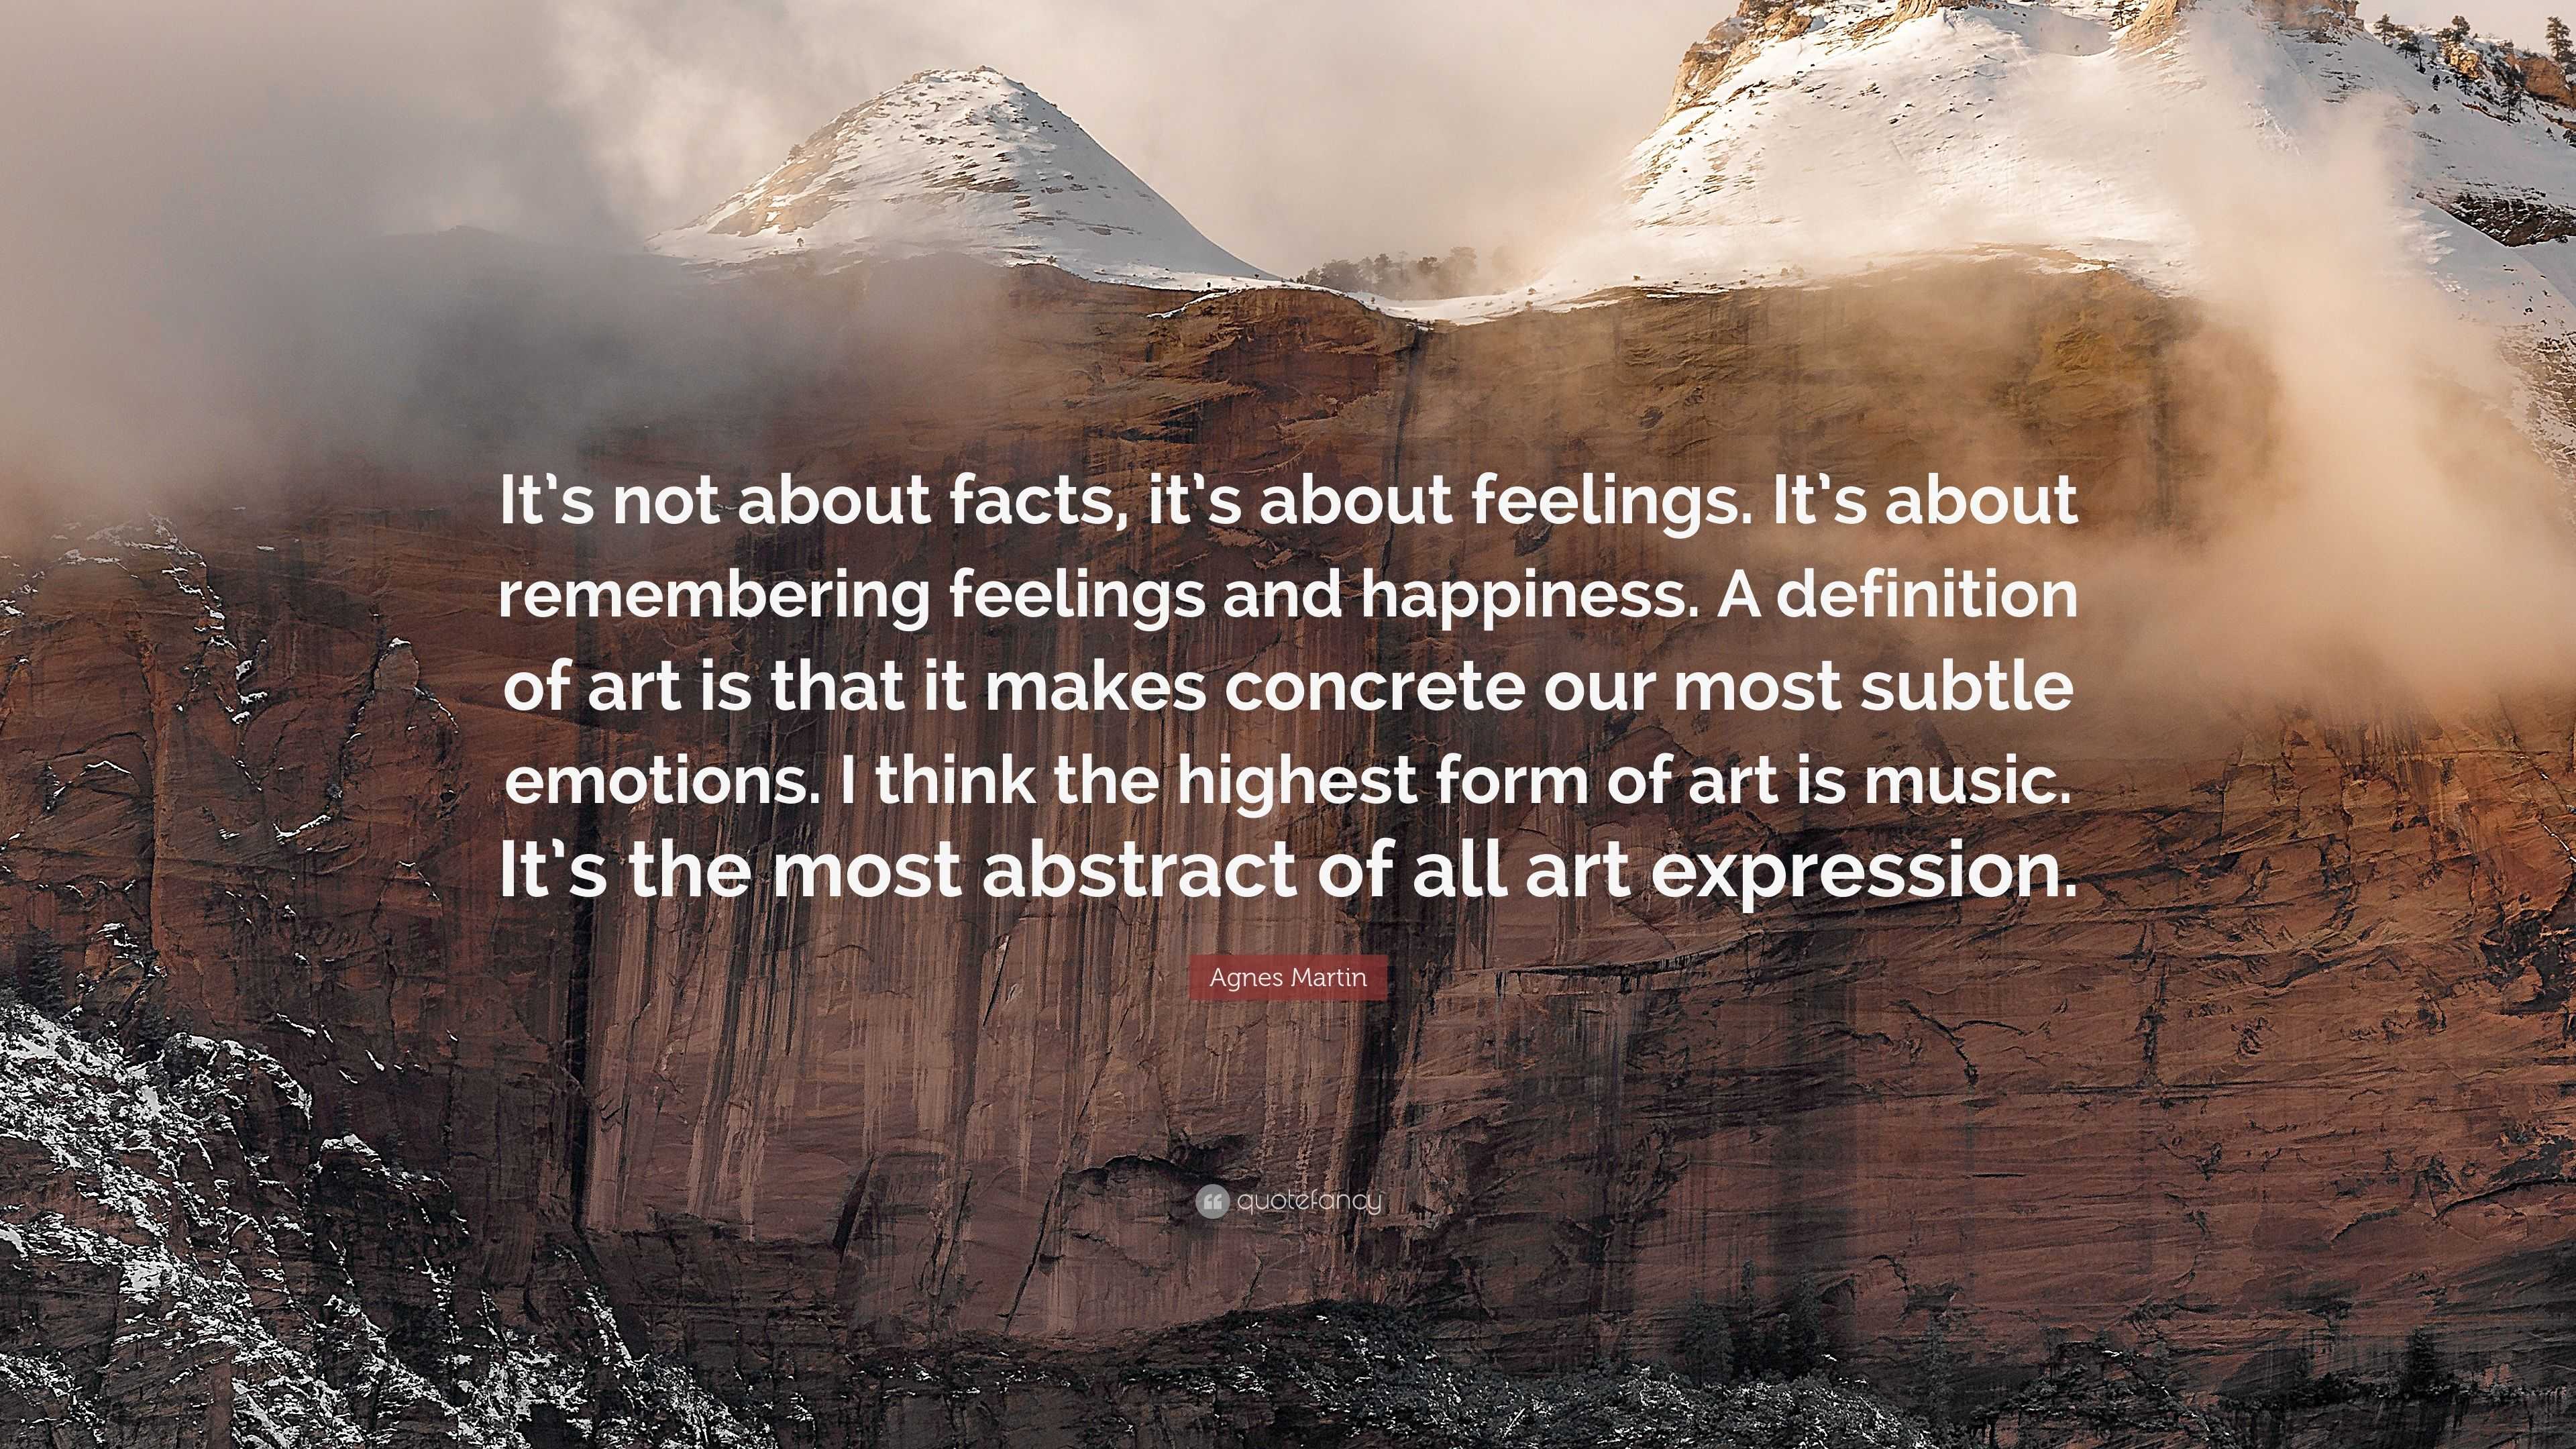 Agnes Martin Quote: “It's not about facts, it's about feelings